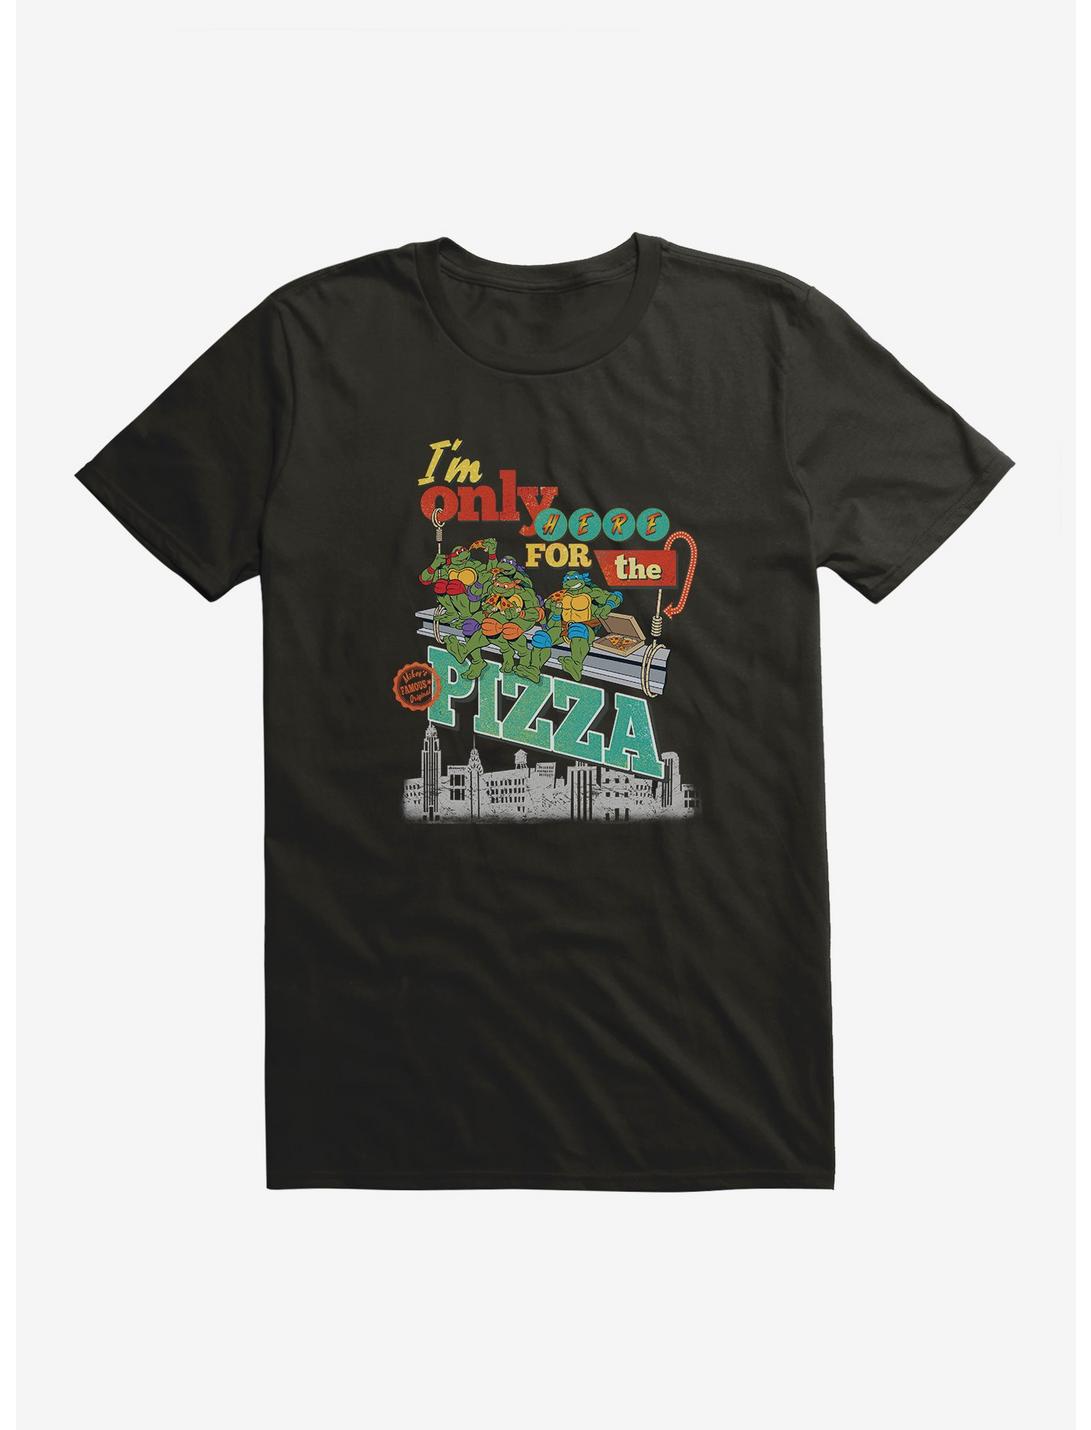 Teenage Mutant Ninja Turtles Only Here For The Pizza T-Shirt, BLACK, hi-res